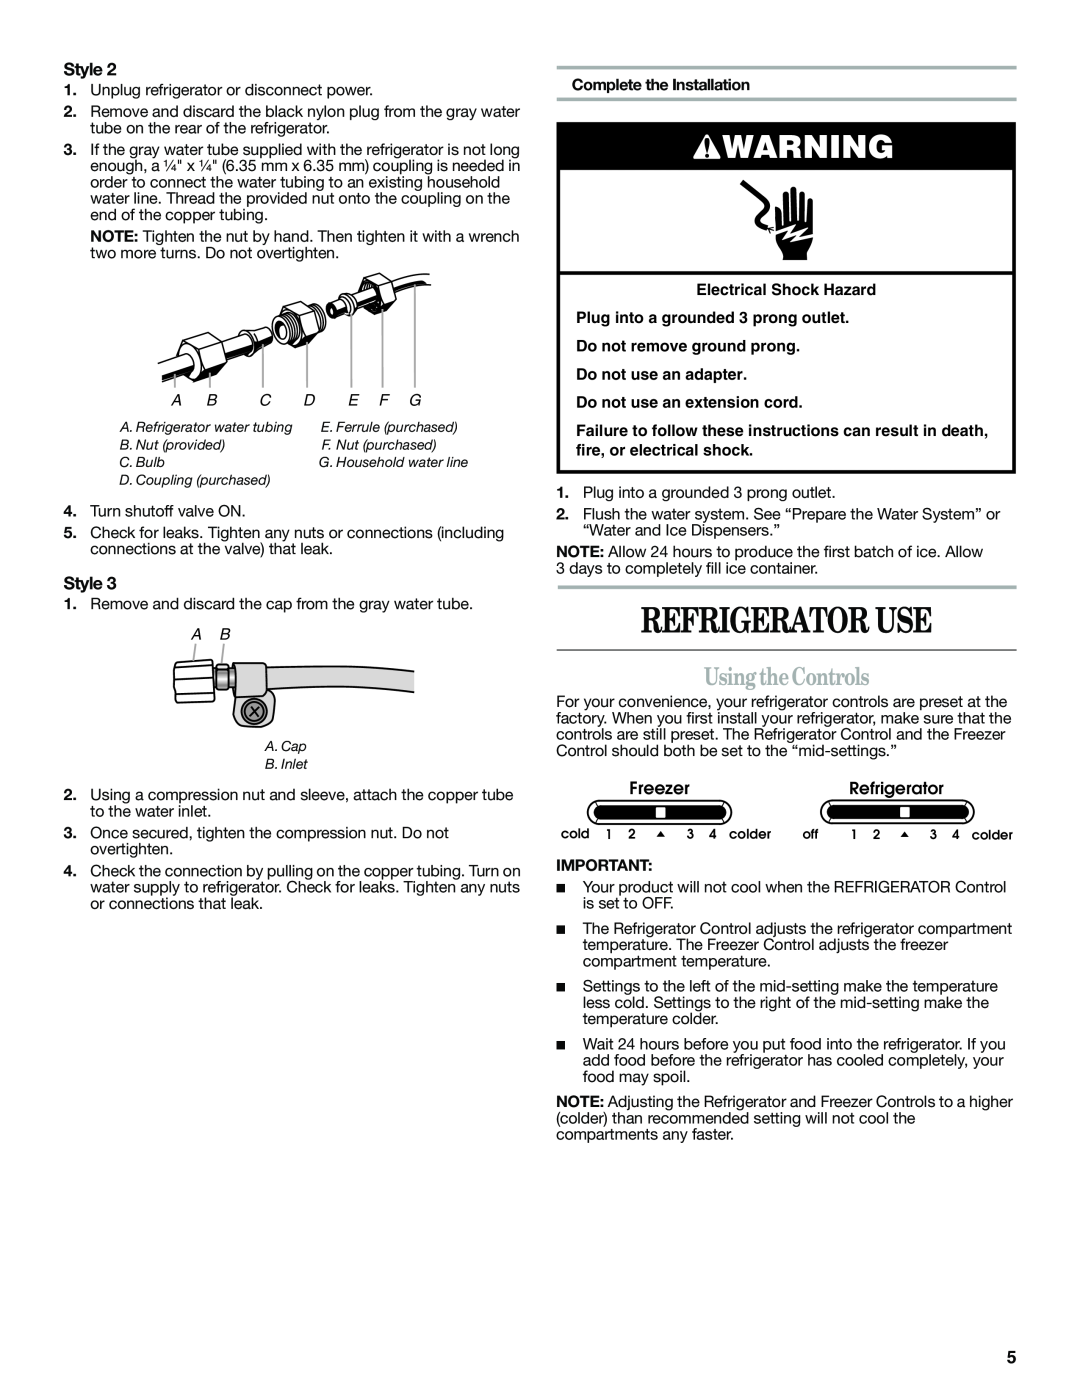 Whirlpool W10193164A installation instructions Refrigerator Use, Using theControls, Style, E F G, Complete the Installation 